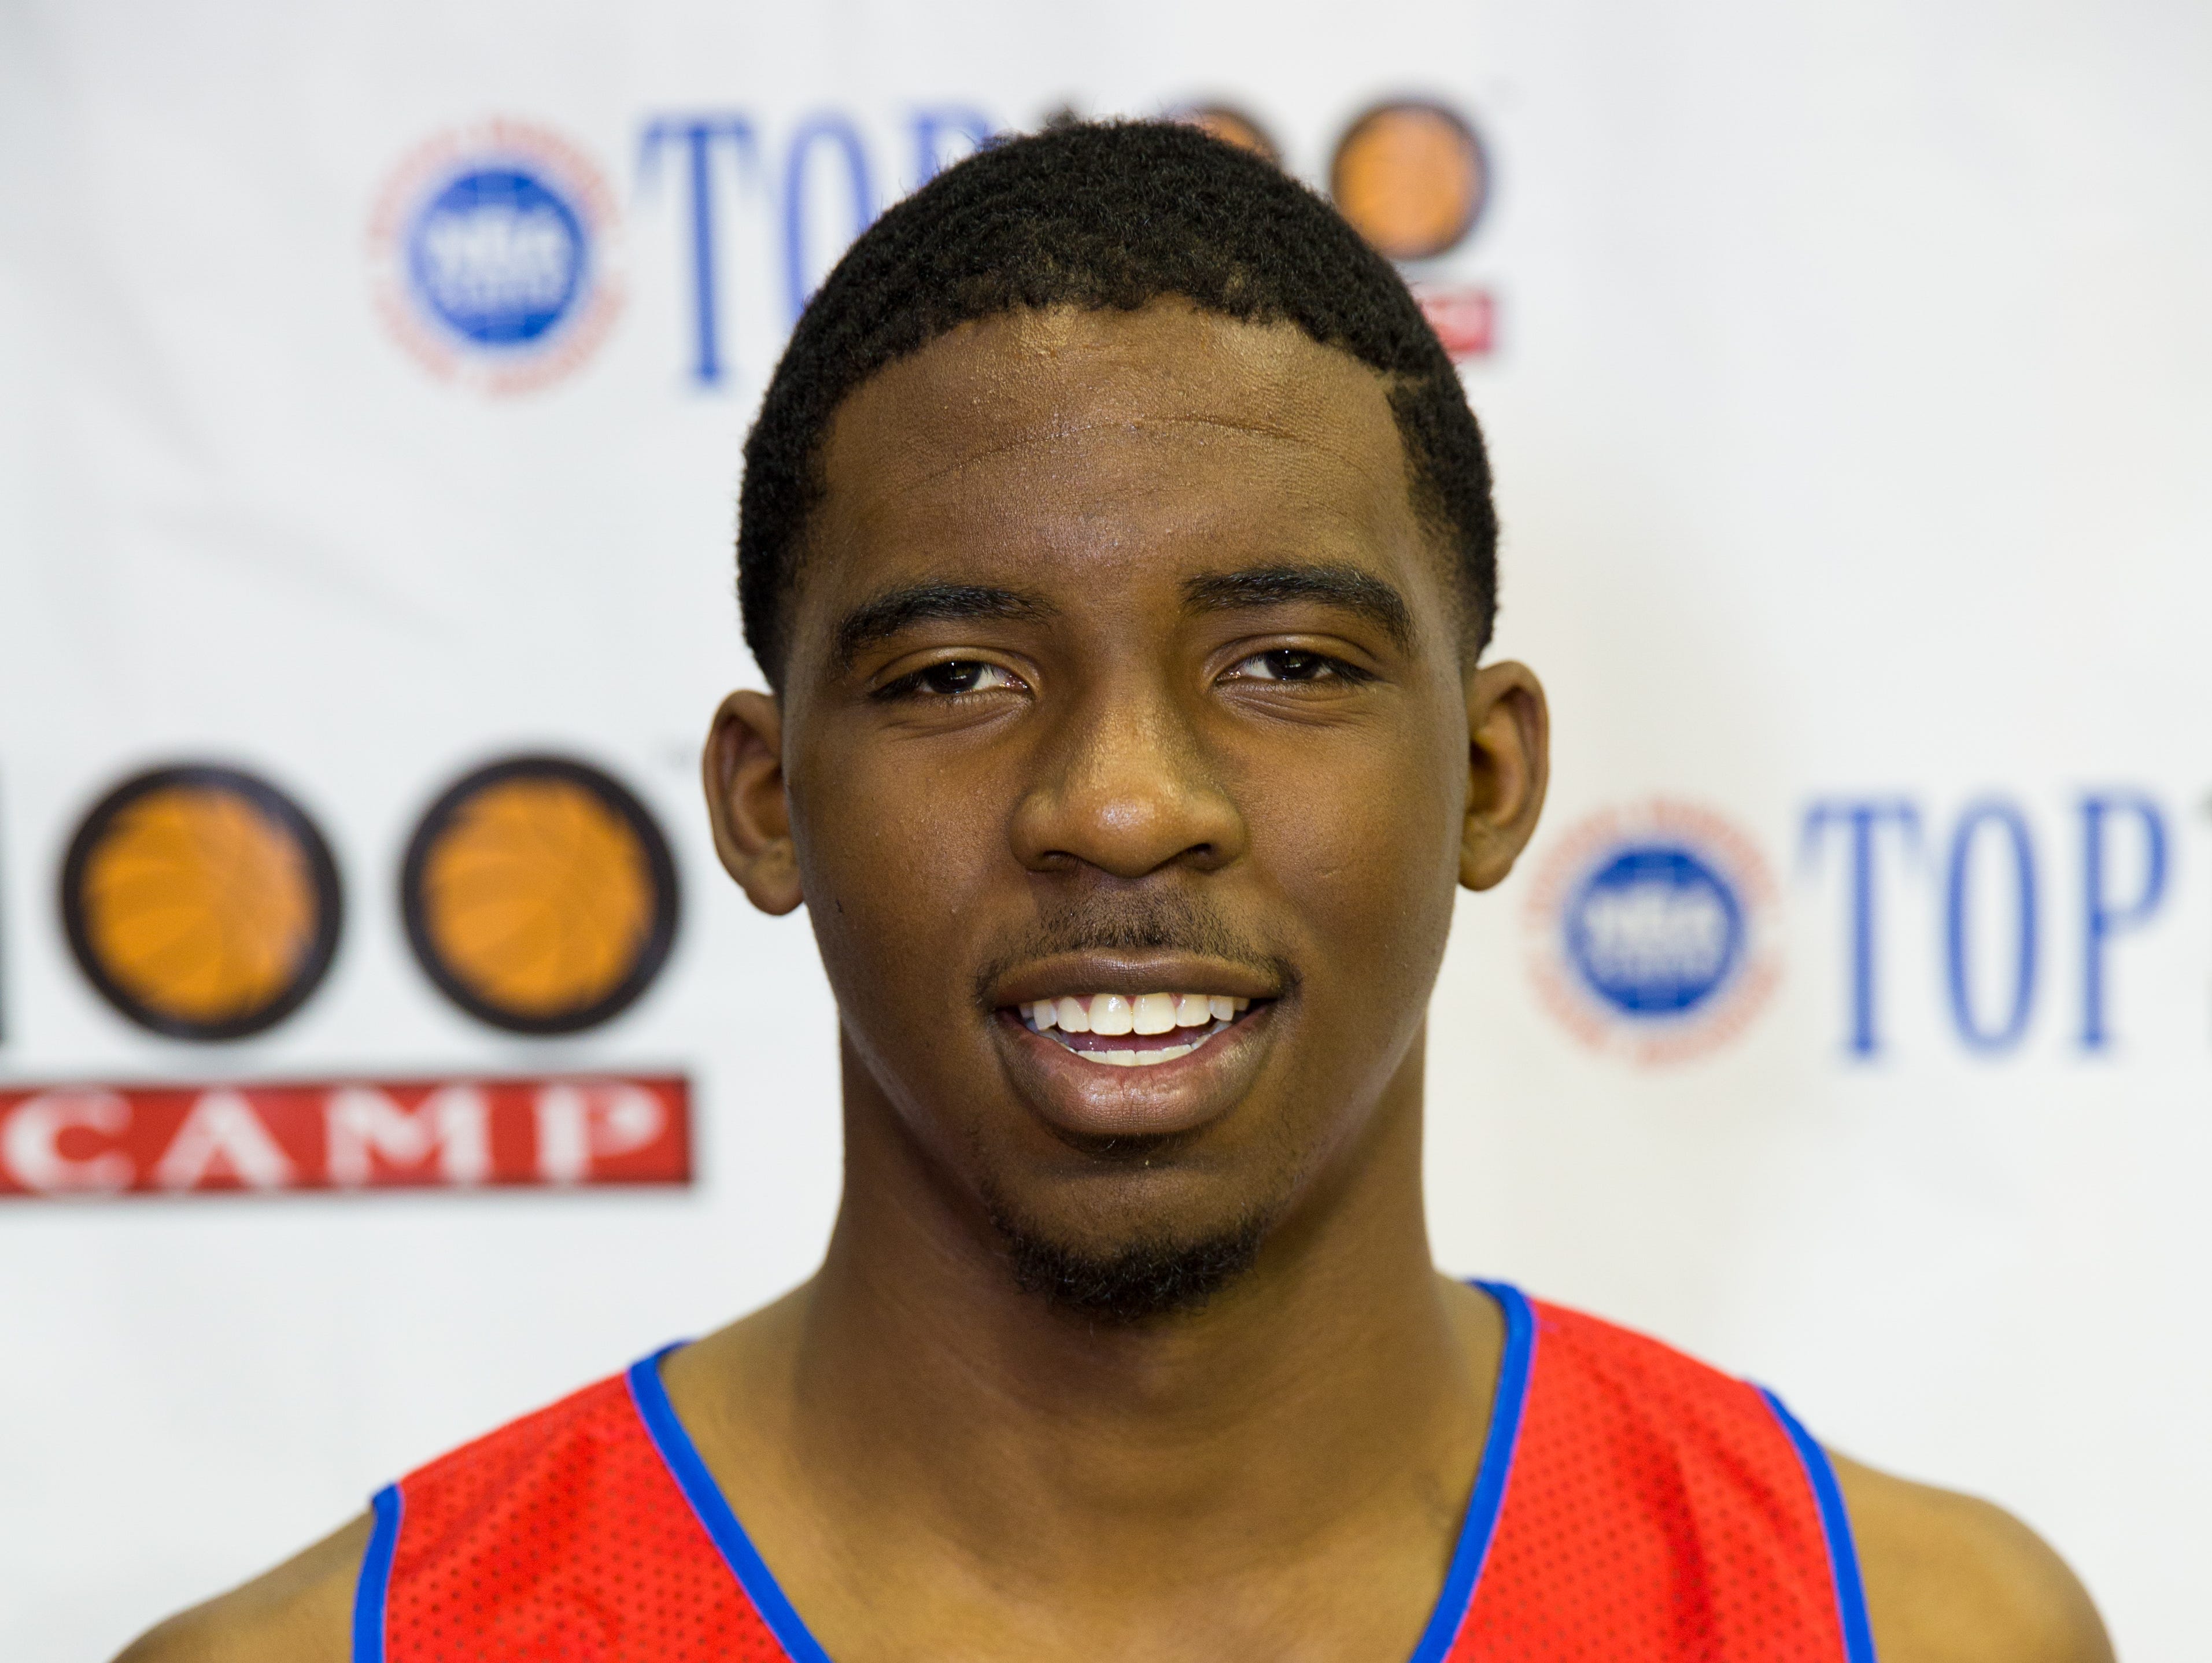 Taylor County's Quentin Goodin is one of the top 100 prospects in the Class of 2016 and Kentucky's top rising senior.